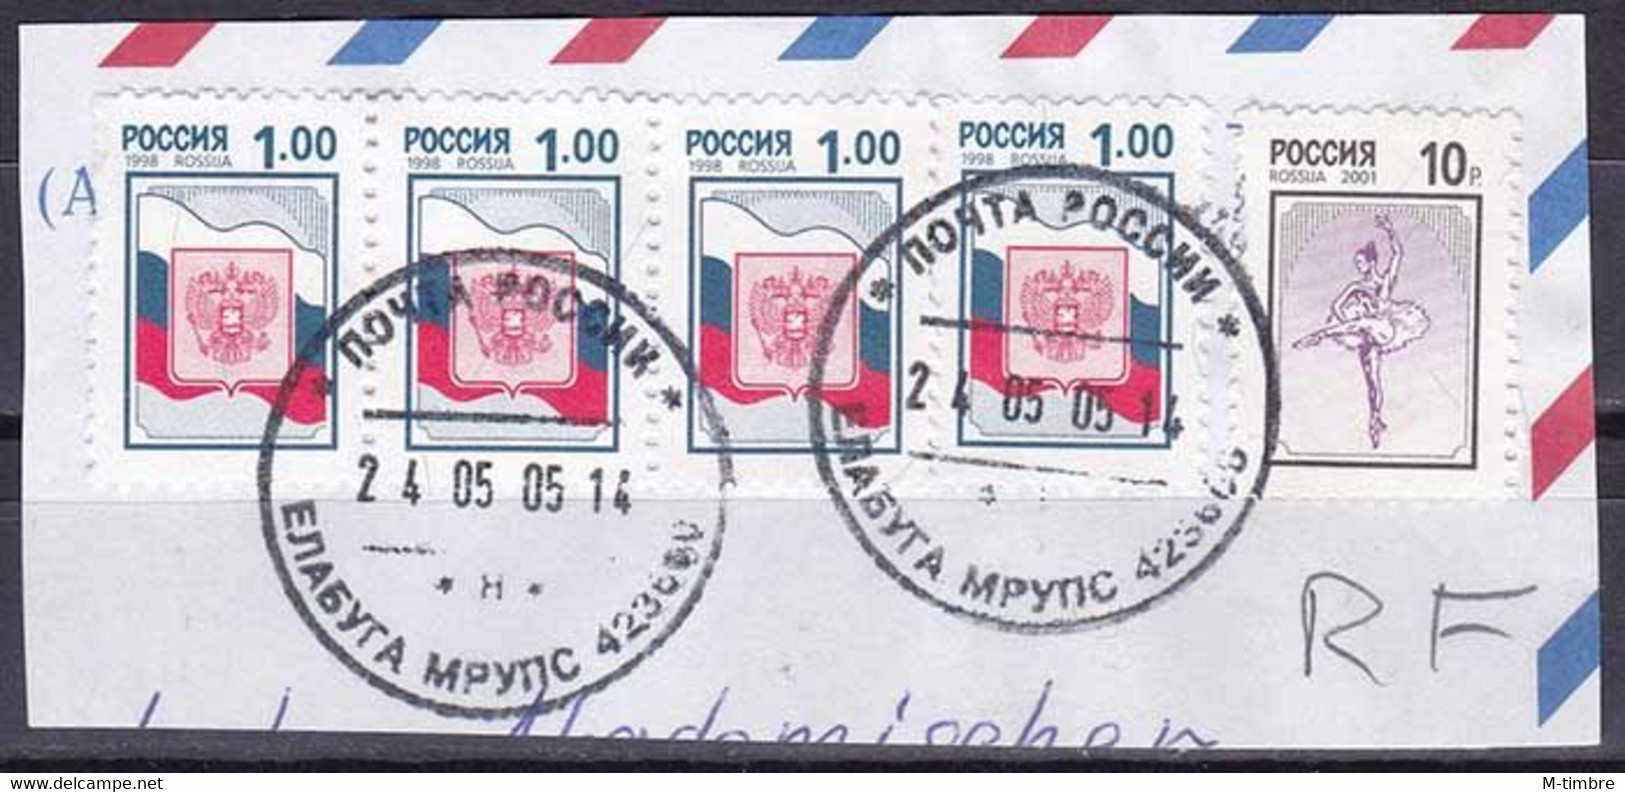 Russie YT 6319 + 6542 Mi 633w + 885 Année 1998 - 2001 (Used °) - Used Stamps